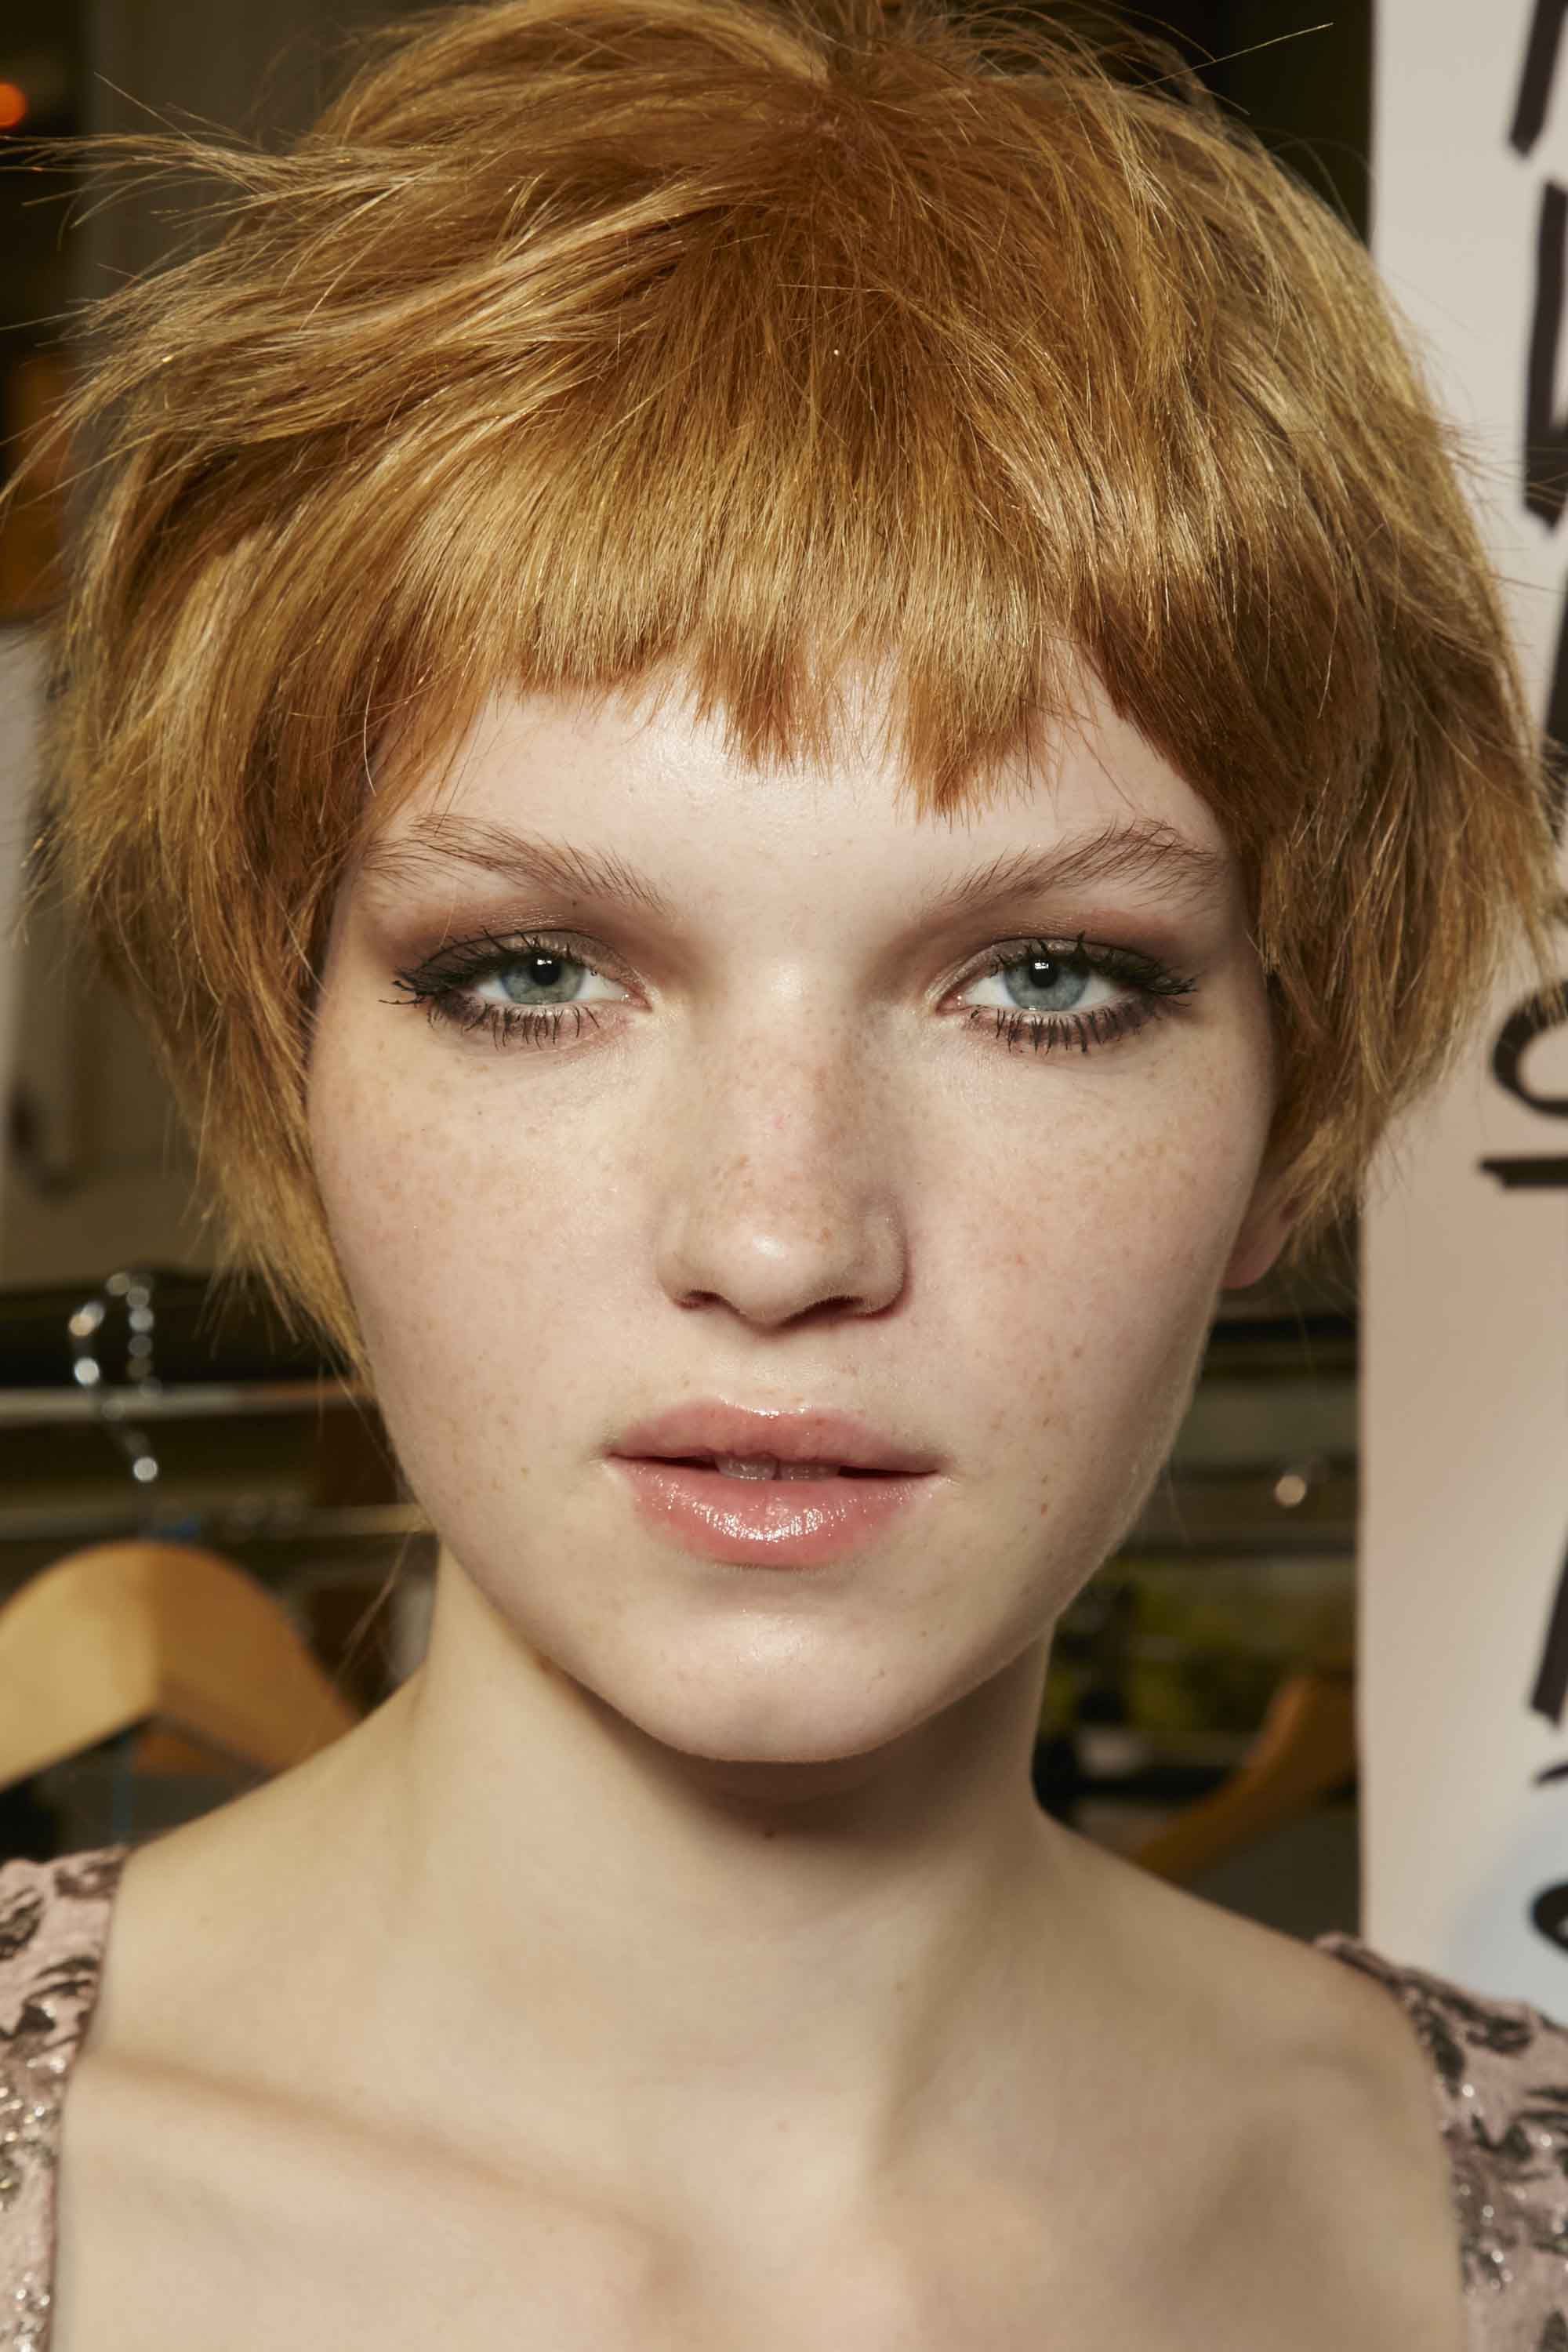 5 Cool Ways To Wear Short Bangs – Plus Need To Know Styling Tips With Regard To Short Haircuts With Fringe Bangs (View 5 of 25)